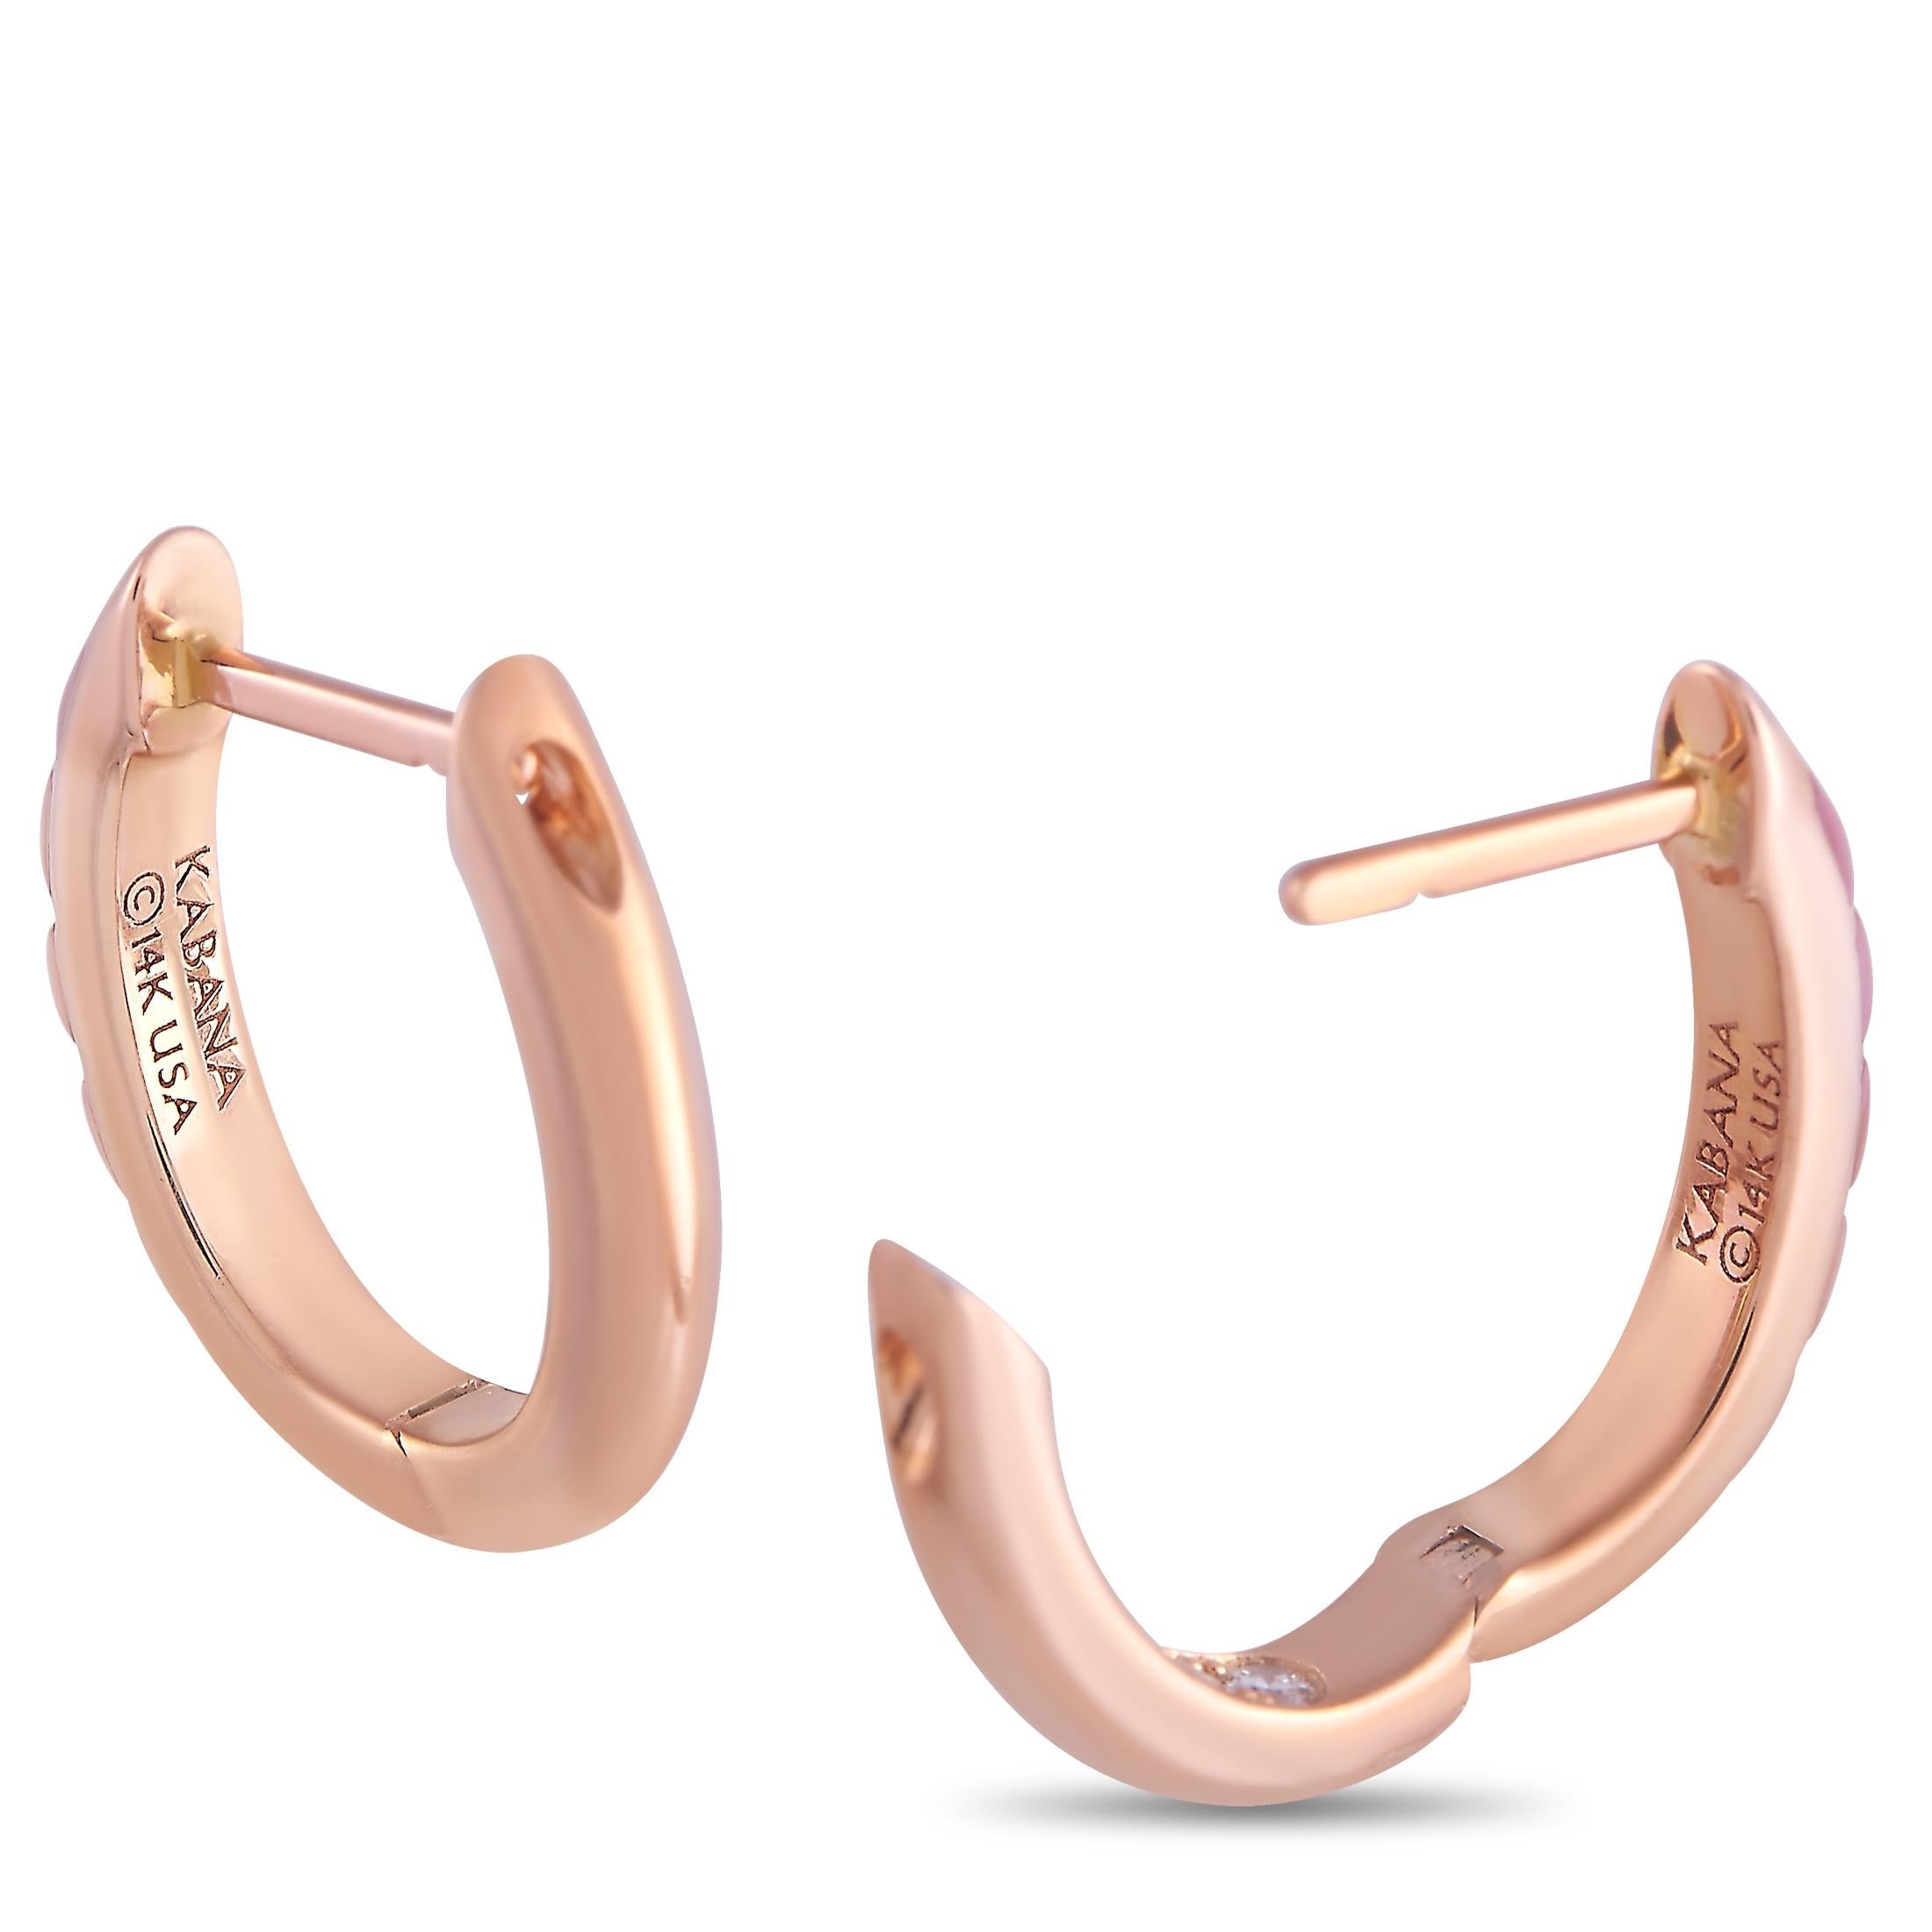 These pretty Kabana earrings add the perfect flash of sparkle. The earrings are made with warm 14K rose gold and inlaid with soft pink pieces of Mother of Pearl around the outside of the hoop. Each earring is set with a row of small round cut